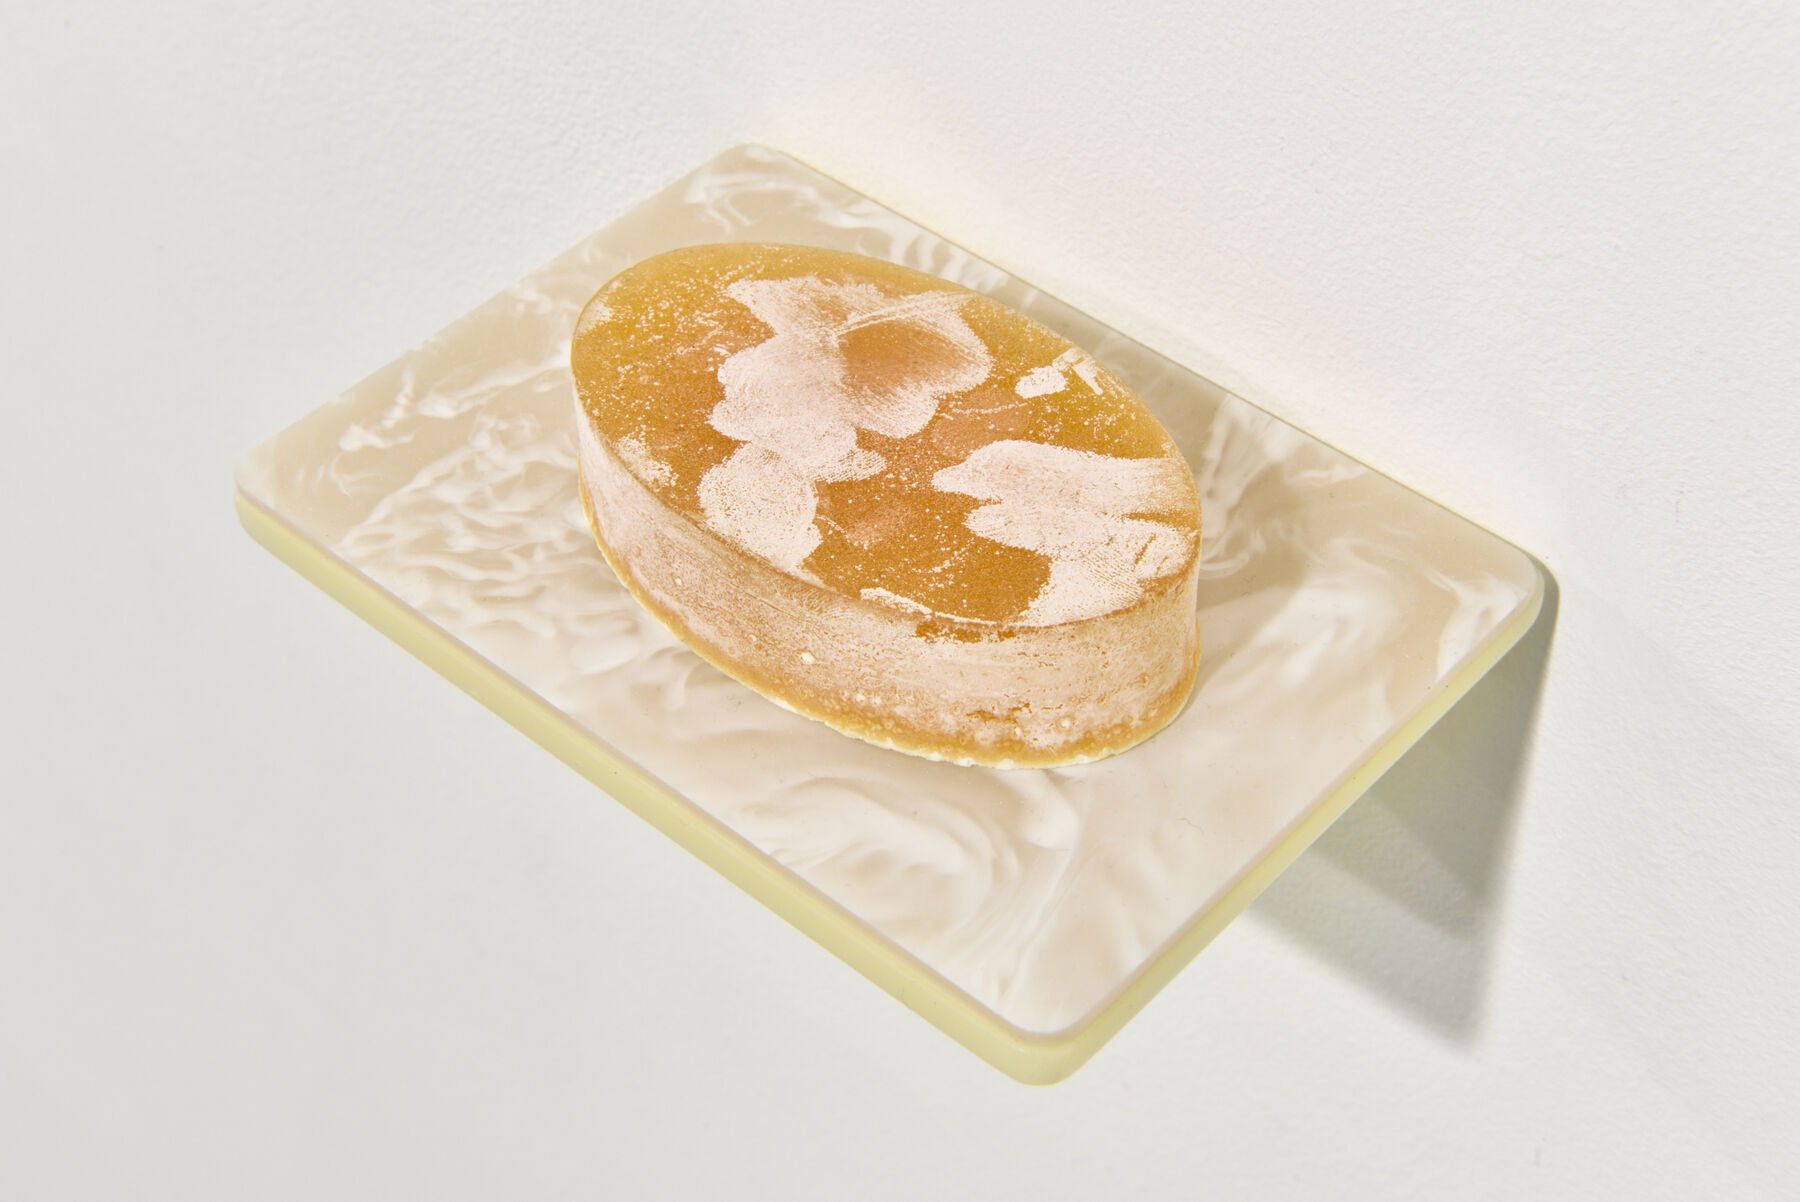 Overhead closeup of golden-yellow soap with white chalky patterning on marble-patterned dish attached to wall